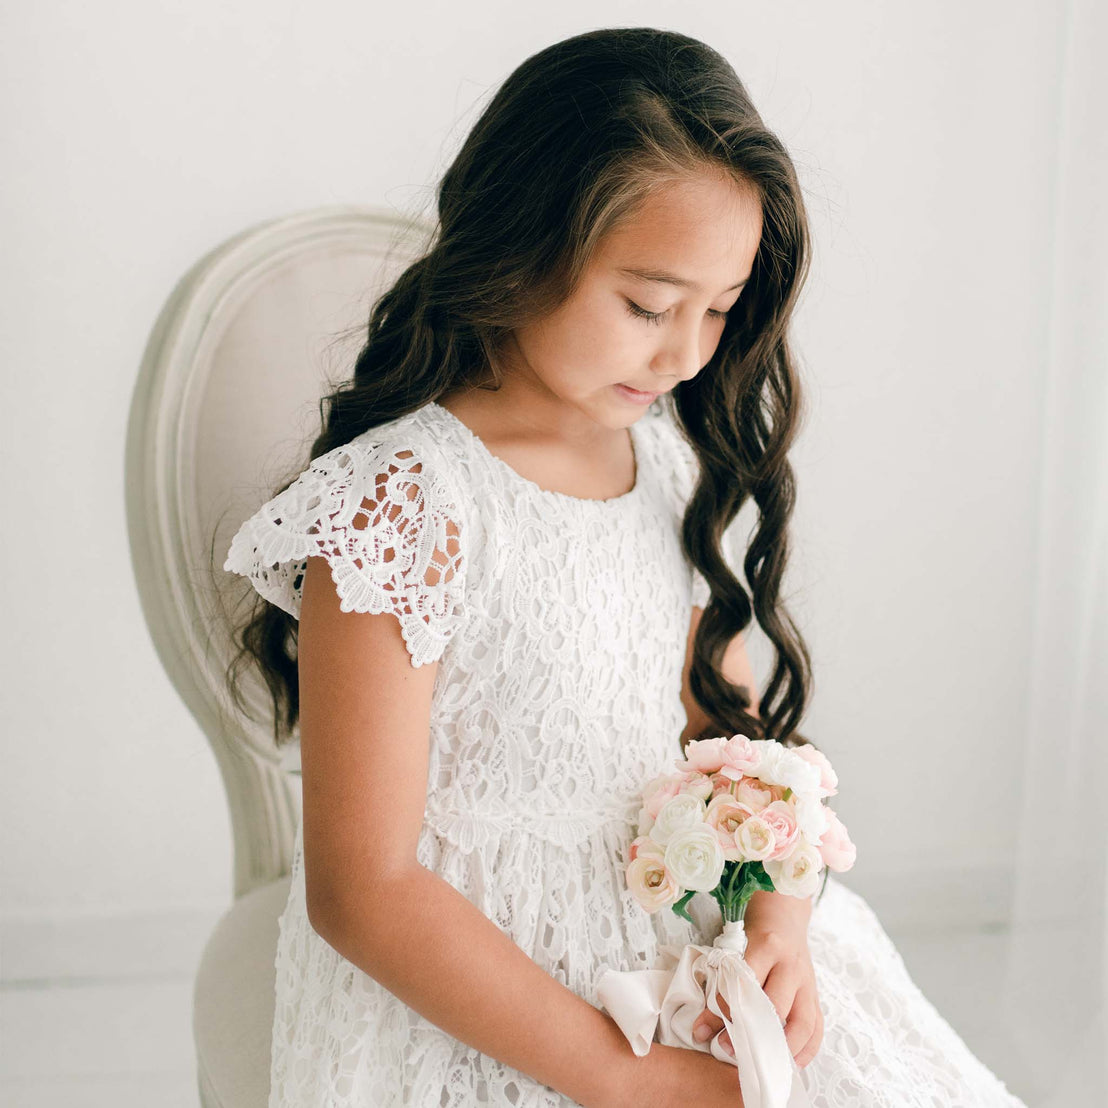 An adolescent girl wearing the Lola Girls Lace Dress. Made with cotton lining in light ivory and adorned with an all-over embroidered lace, plus a lace bodice, lacey cap sleeves, and buttons in back.